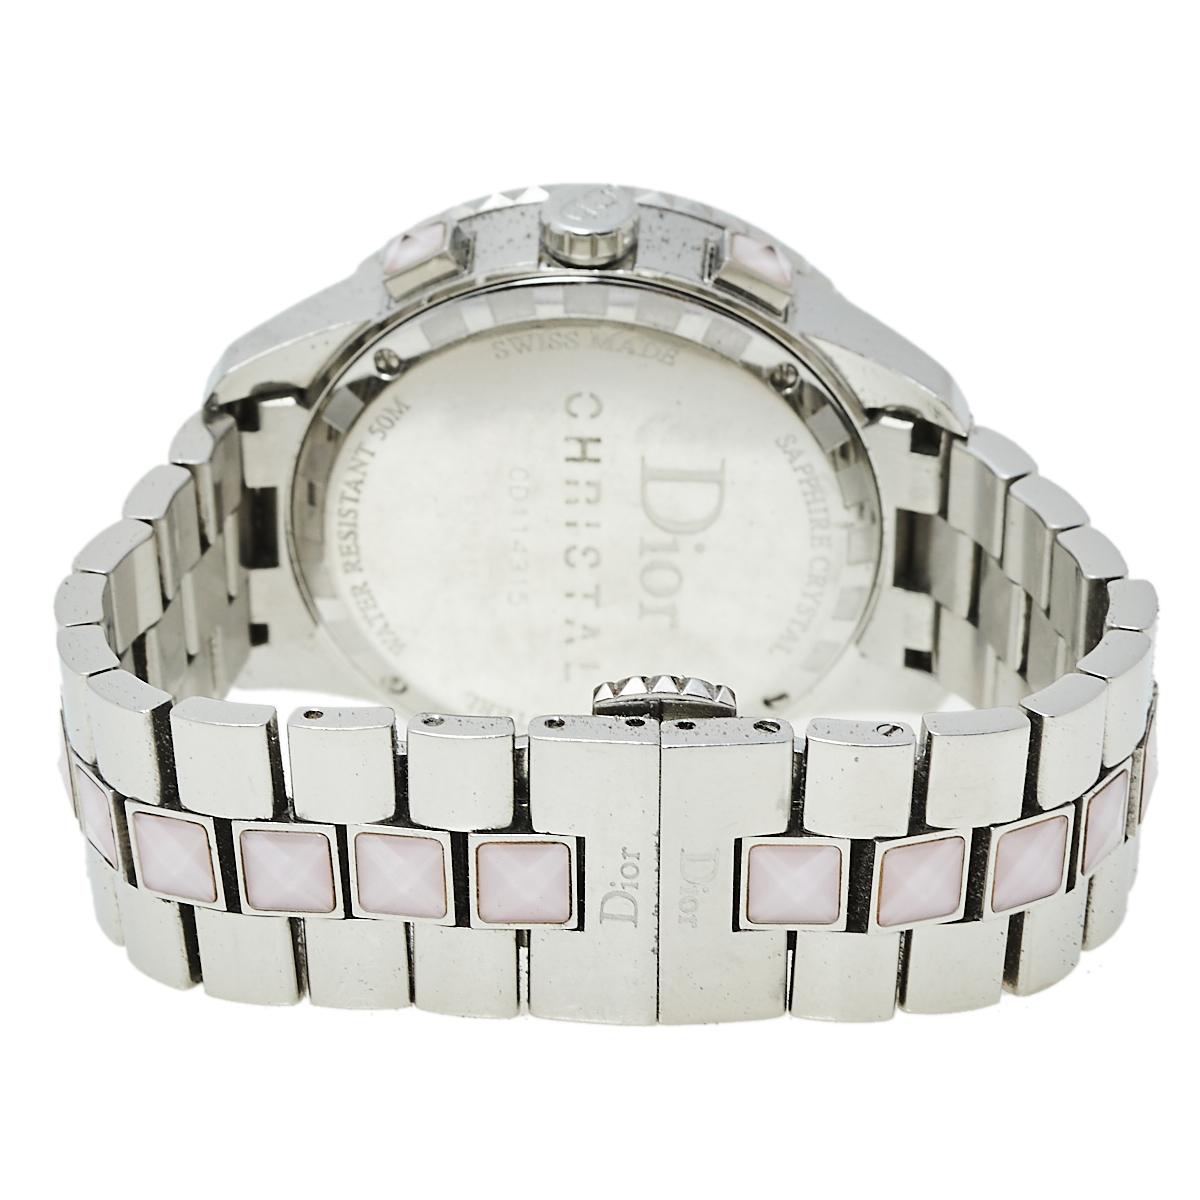 Here's a timepiece to not only assist you with the correct time but also elevate your style quotient. This Dior watch is from their Christal collection, and it is Swiss-made. It is made of stainless steel and embellished with diamonds and sapphires.